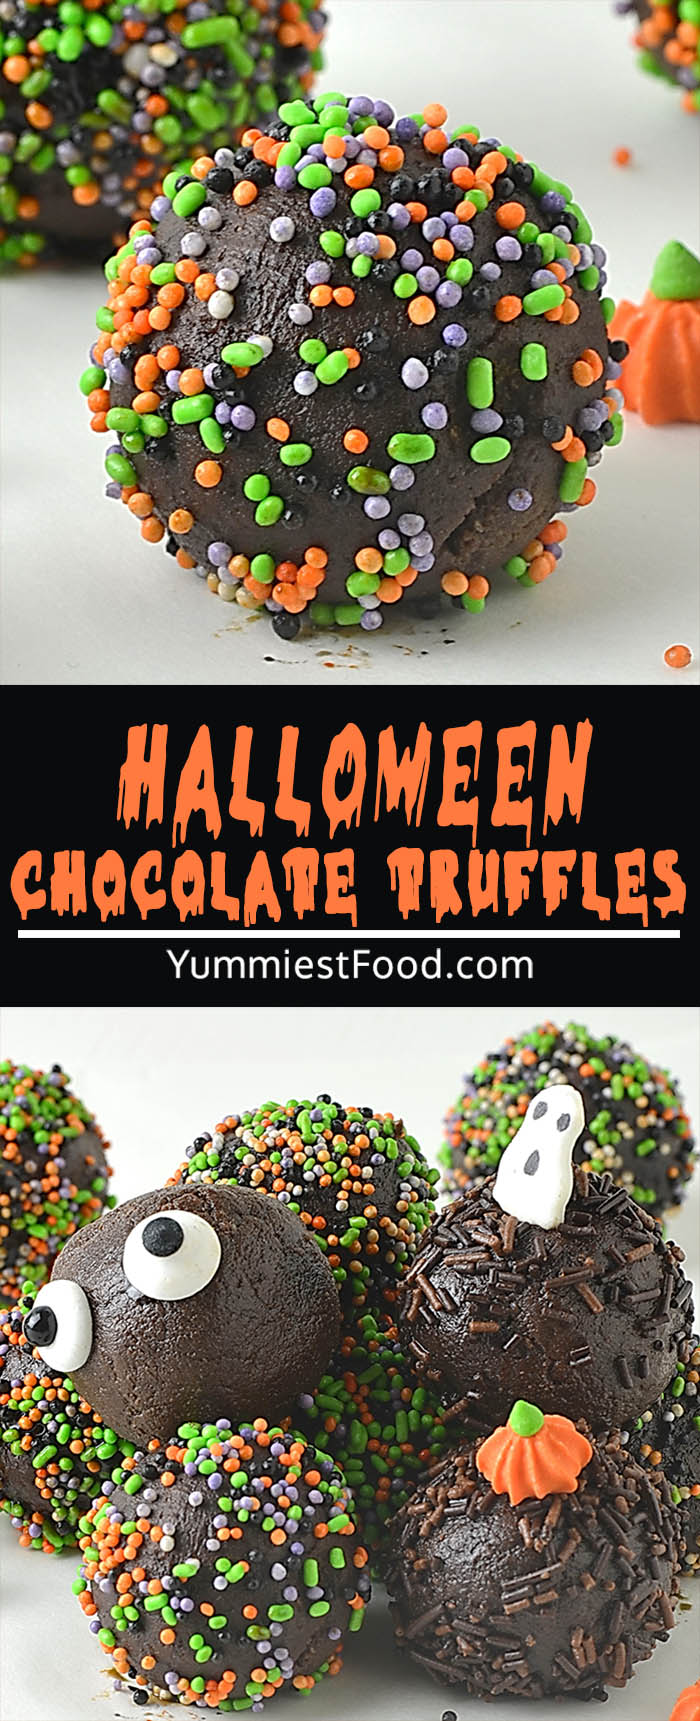  These decadent Halloween Chocolate Truffles are made with just 4 simple ingredients! Perfect for homemade holiday gifts!